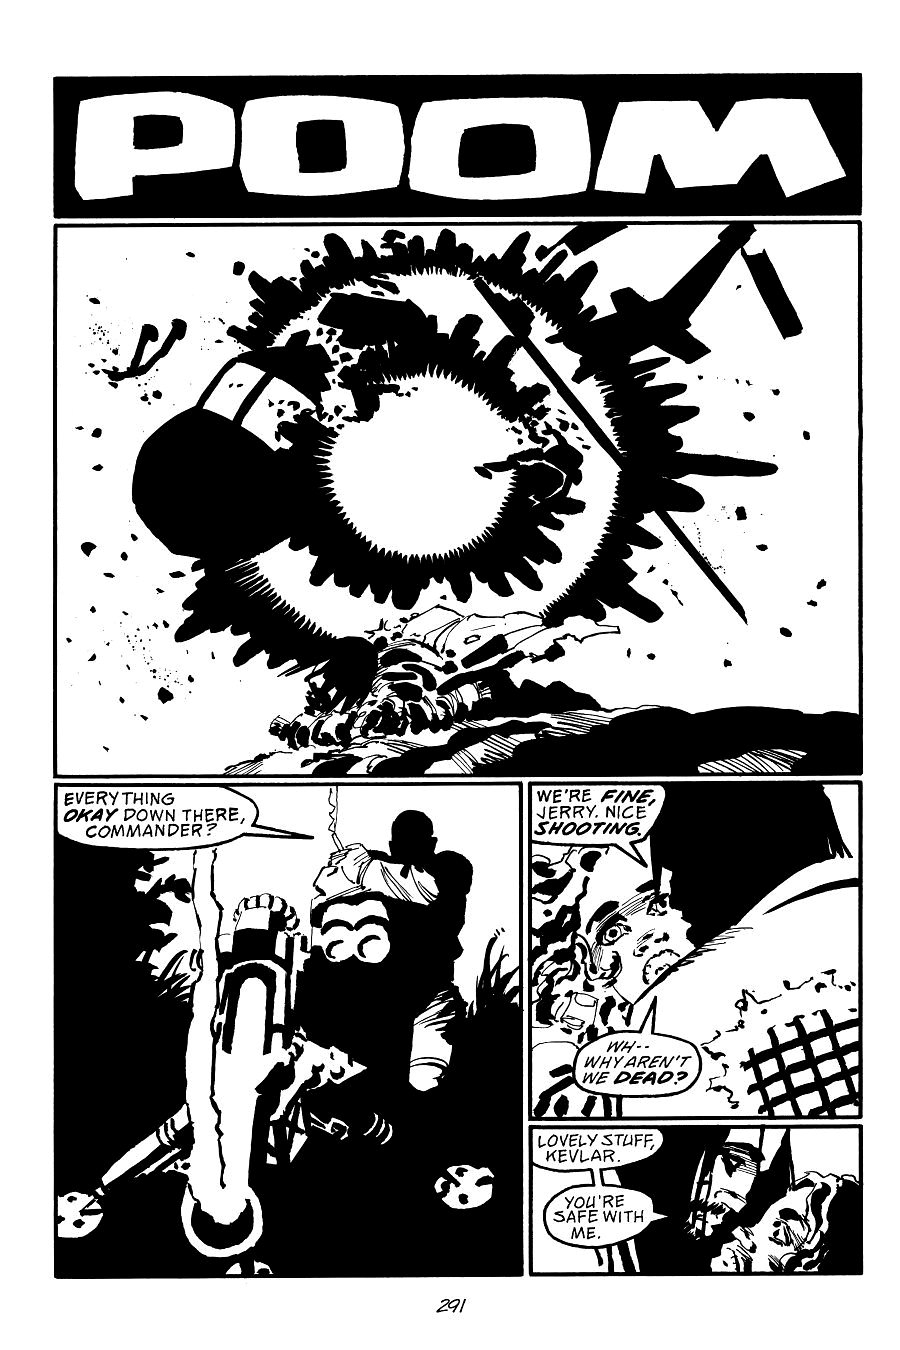 page 291 of sin city 7 hell and back